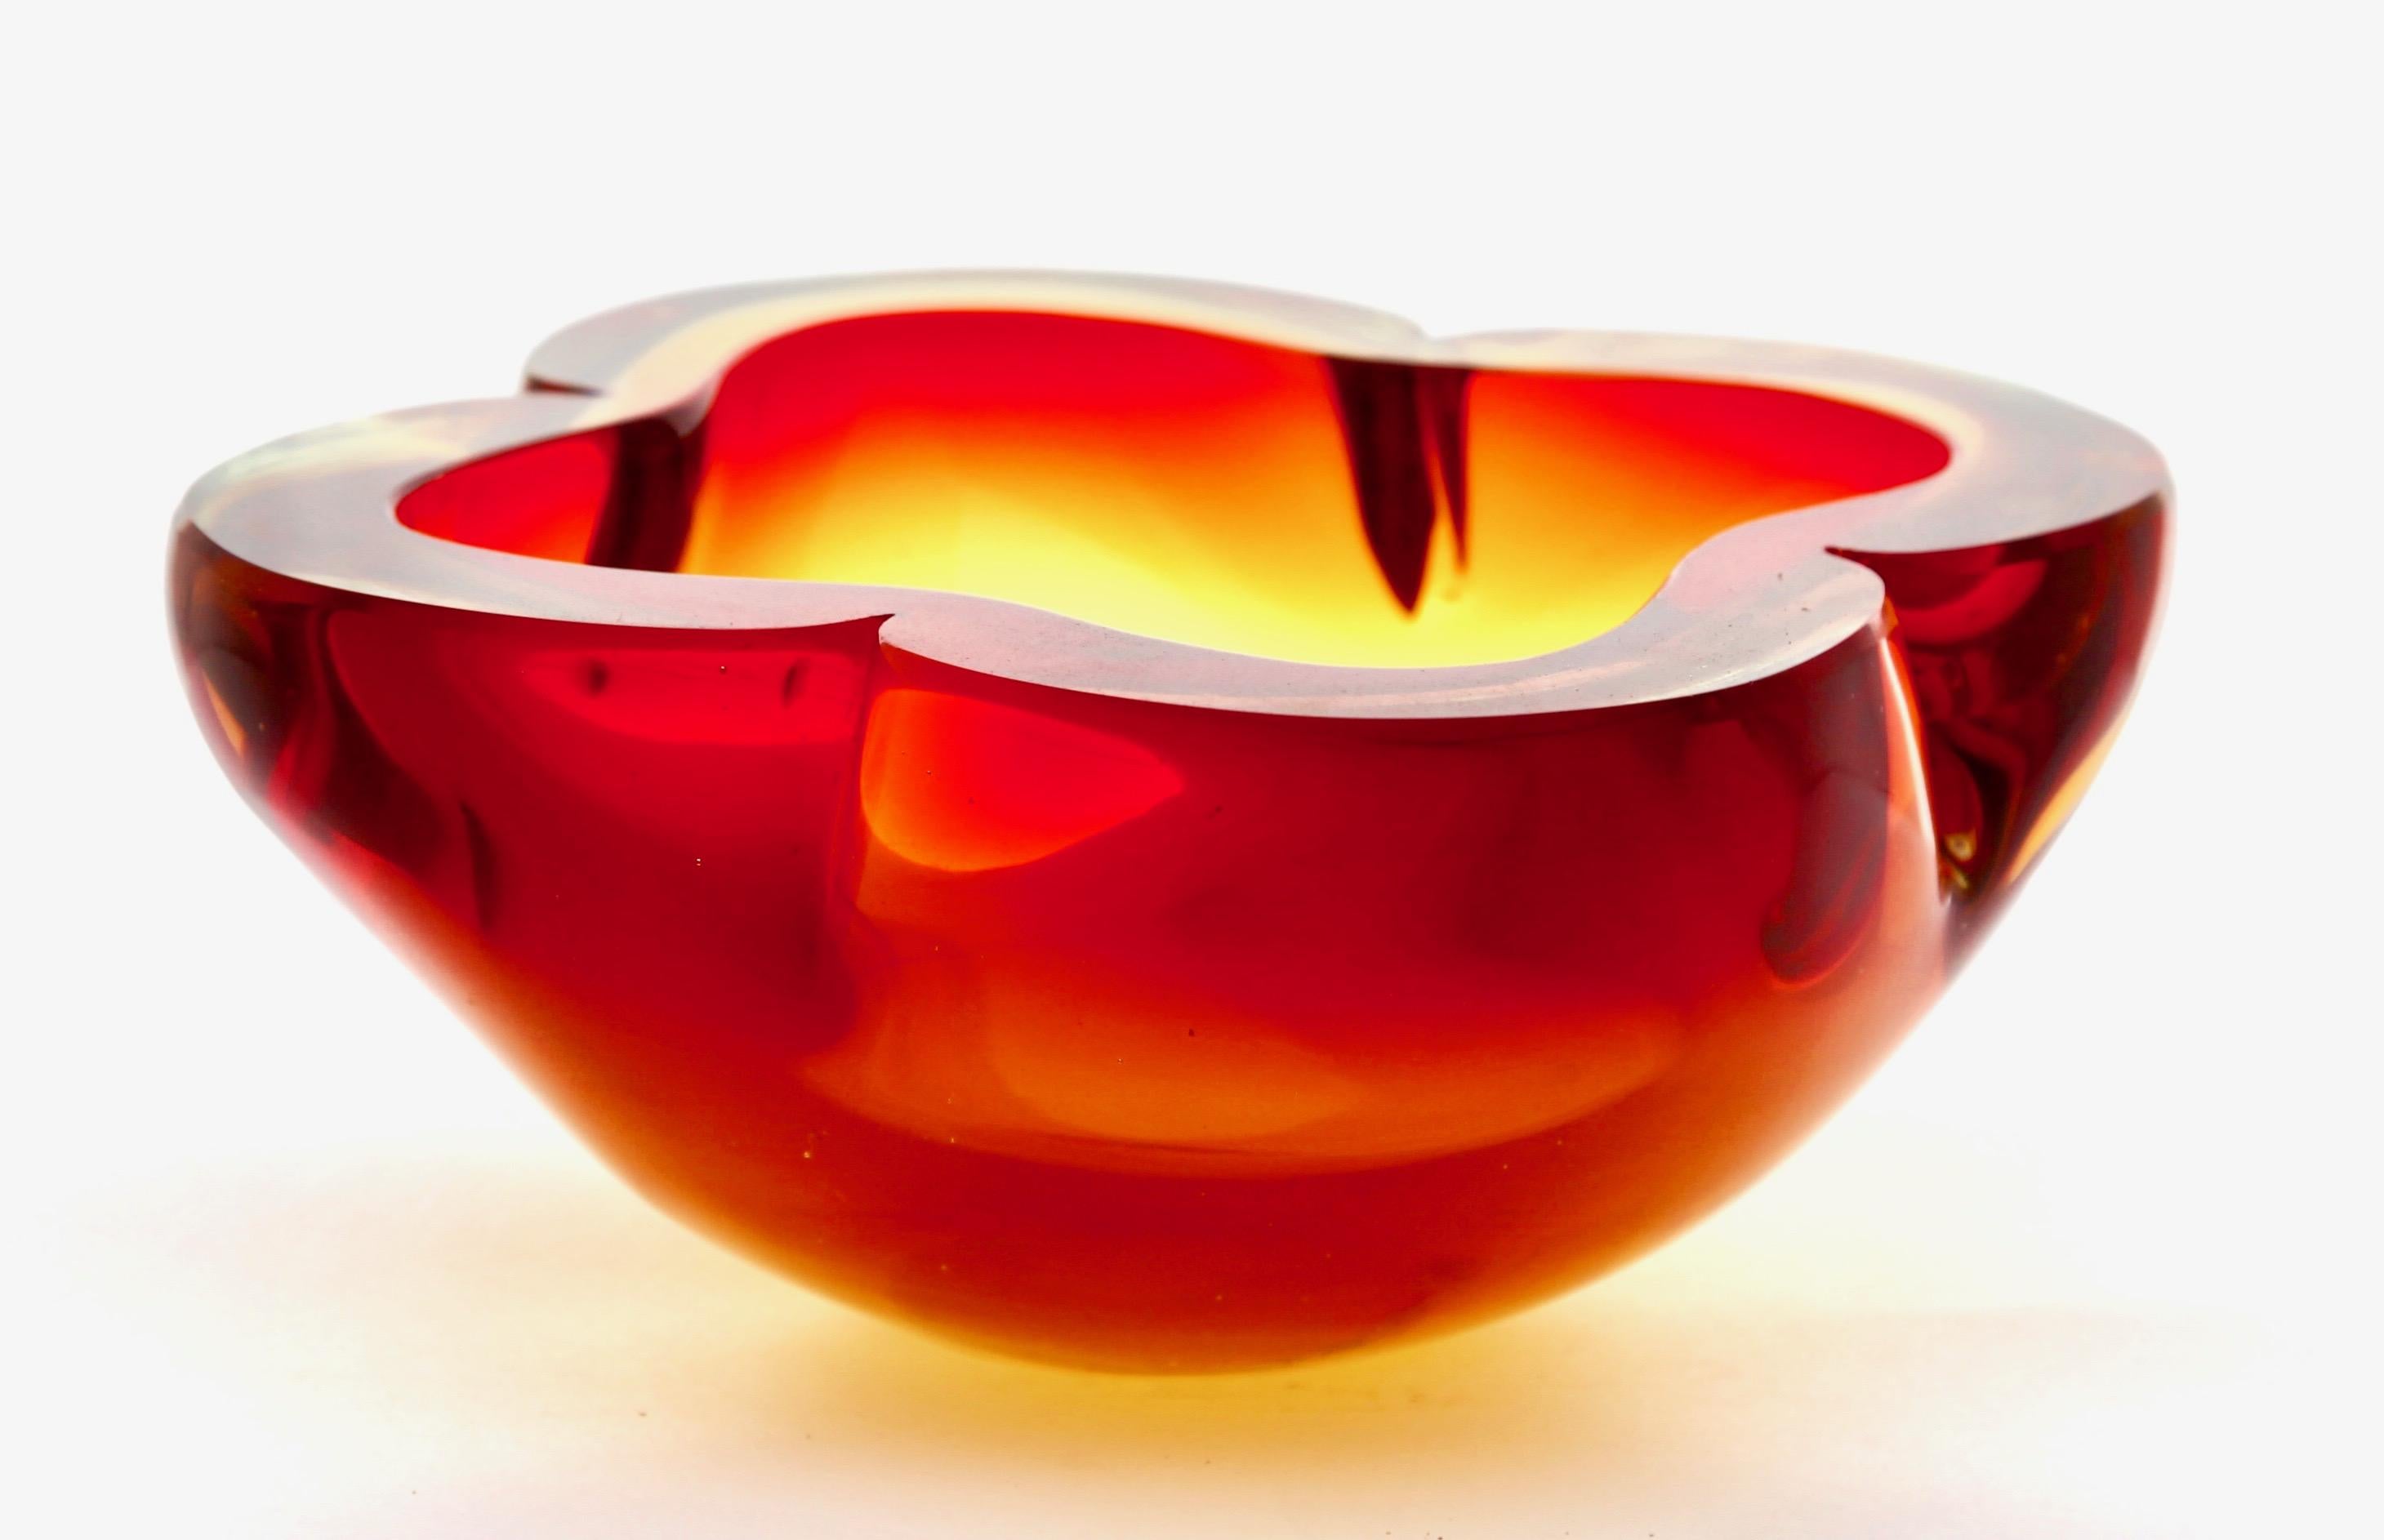 Attributed to Flavio Poli for Seguso d'Arte, this biomorphic four-lobed Murano glass bowl is handcrafted with red highlights fading through to a lighter amber base, bringing warmth into your color scheme.
Still in lovely condition with only a few